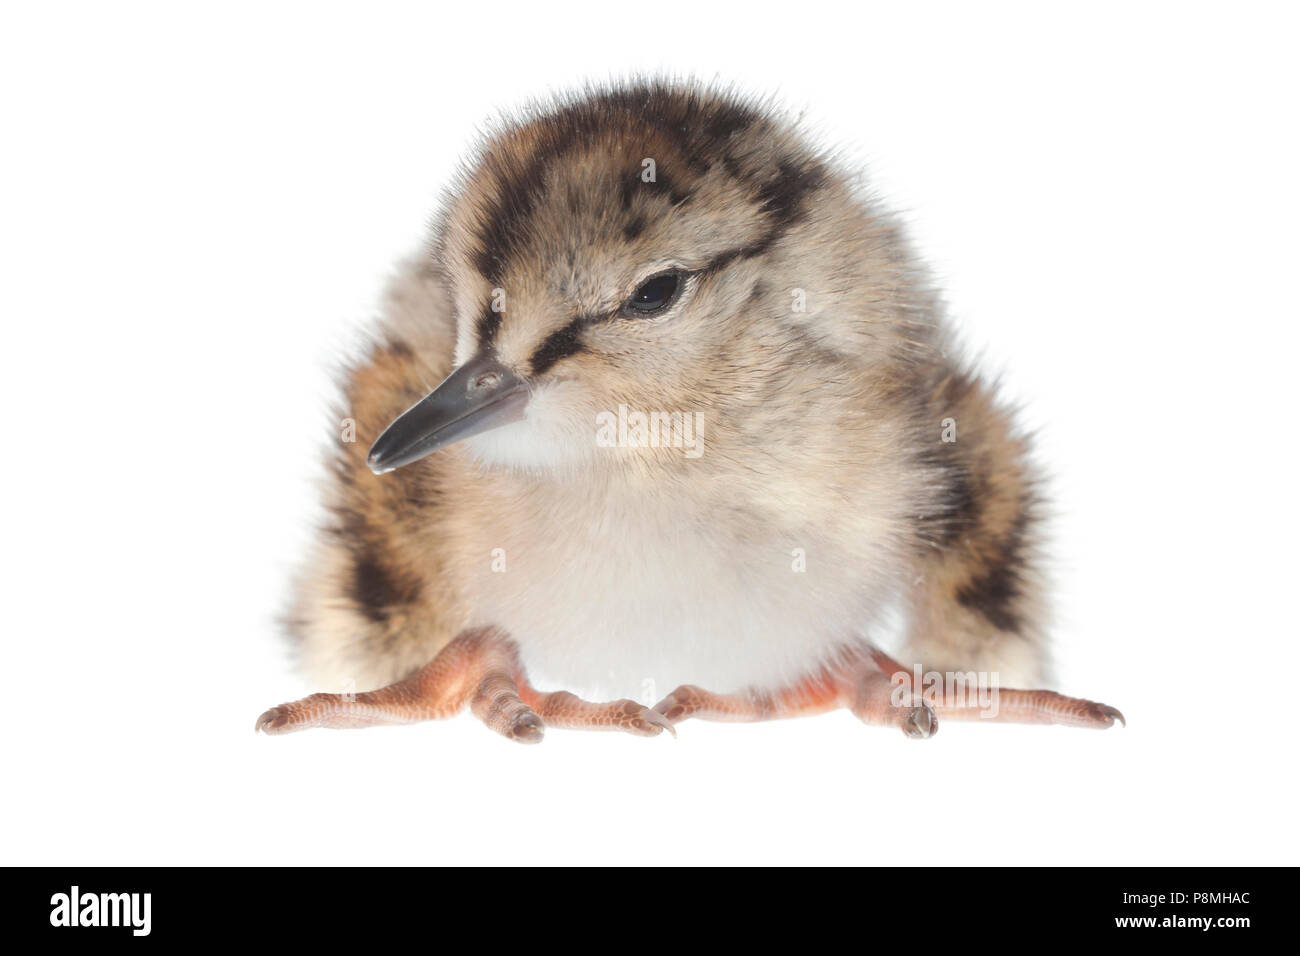 common redshank chick isolated against a white background Stock Photo